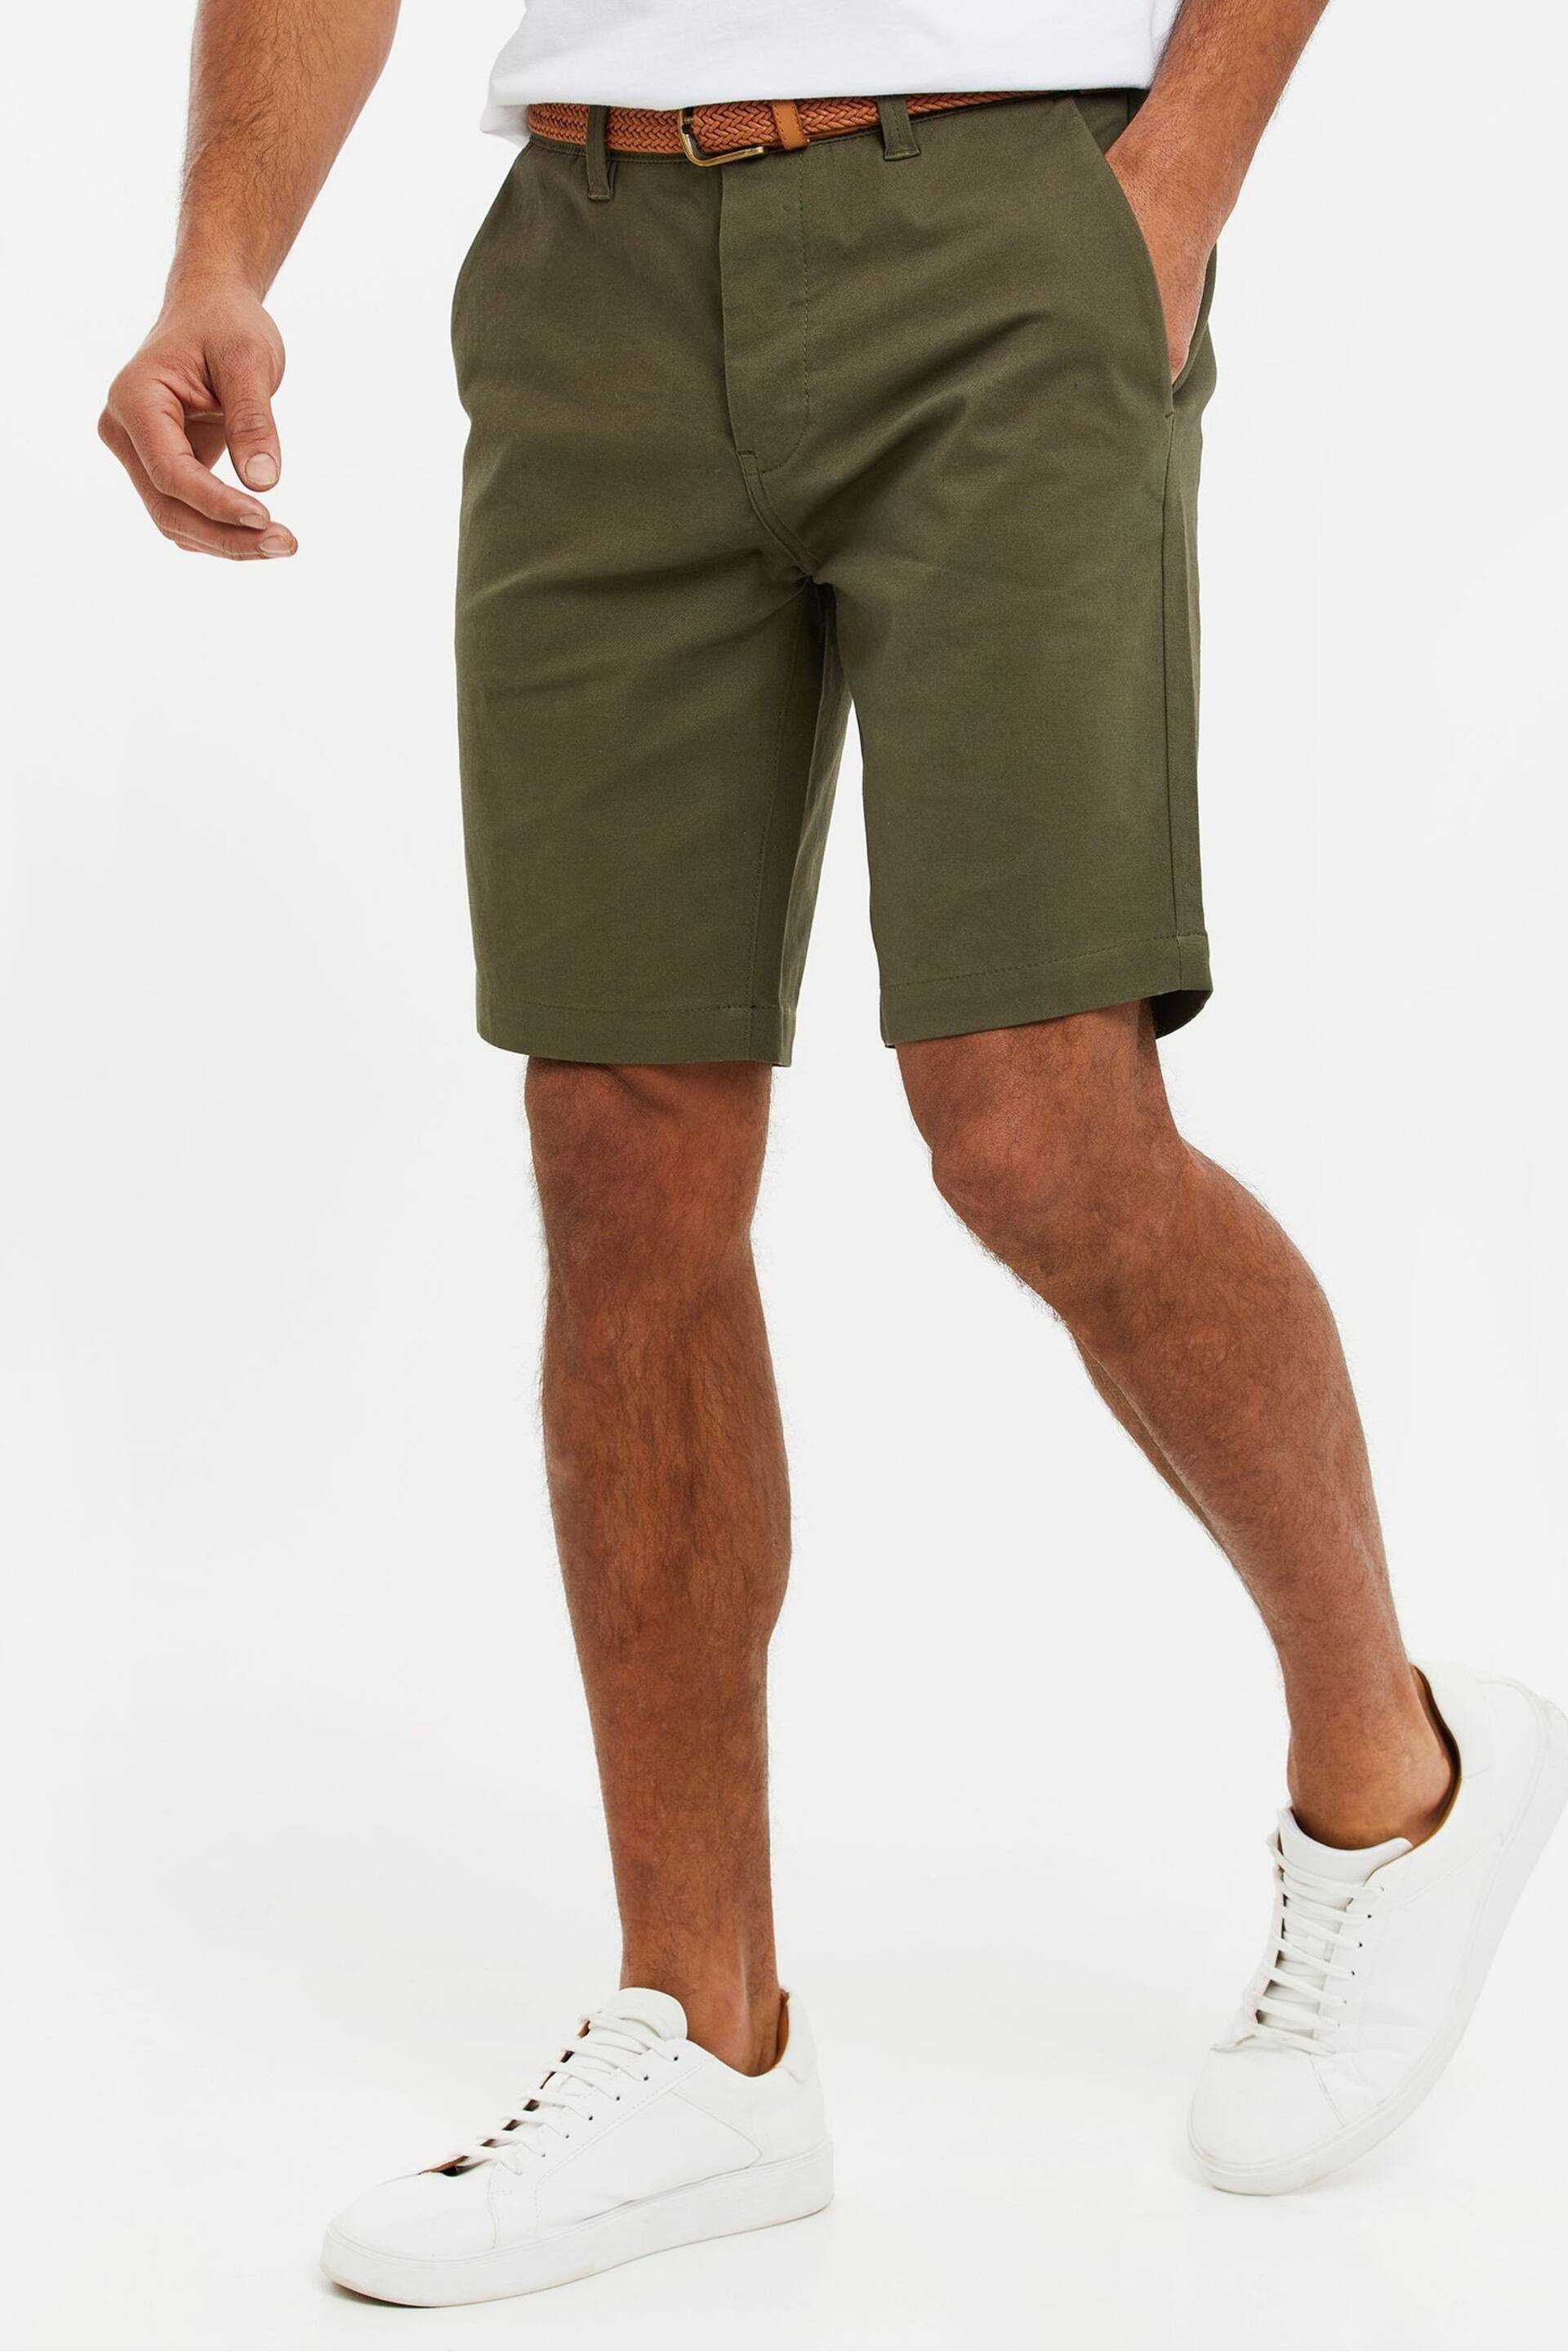 Threadbare Olive Green Cotton Stretch Turn-Up Chino Shorts with Woven Belt - Image 1 of 4